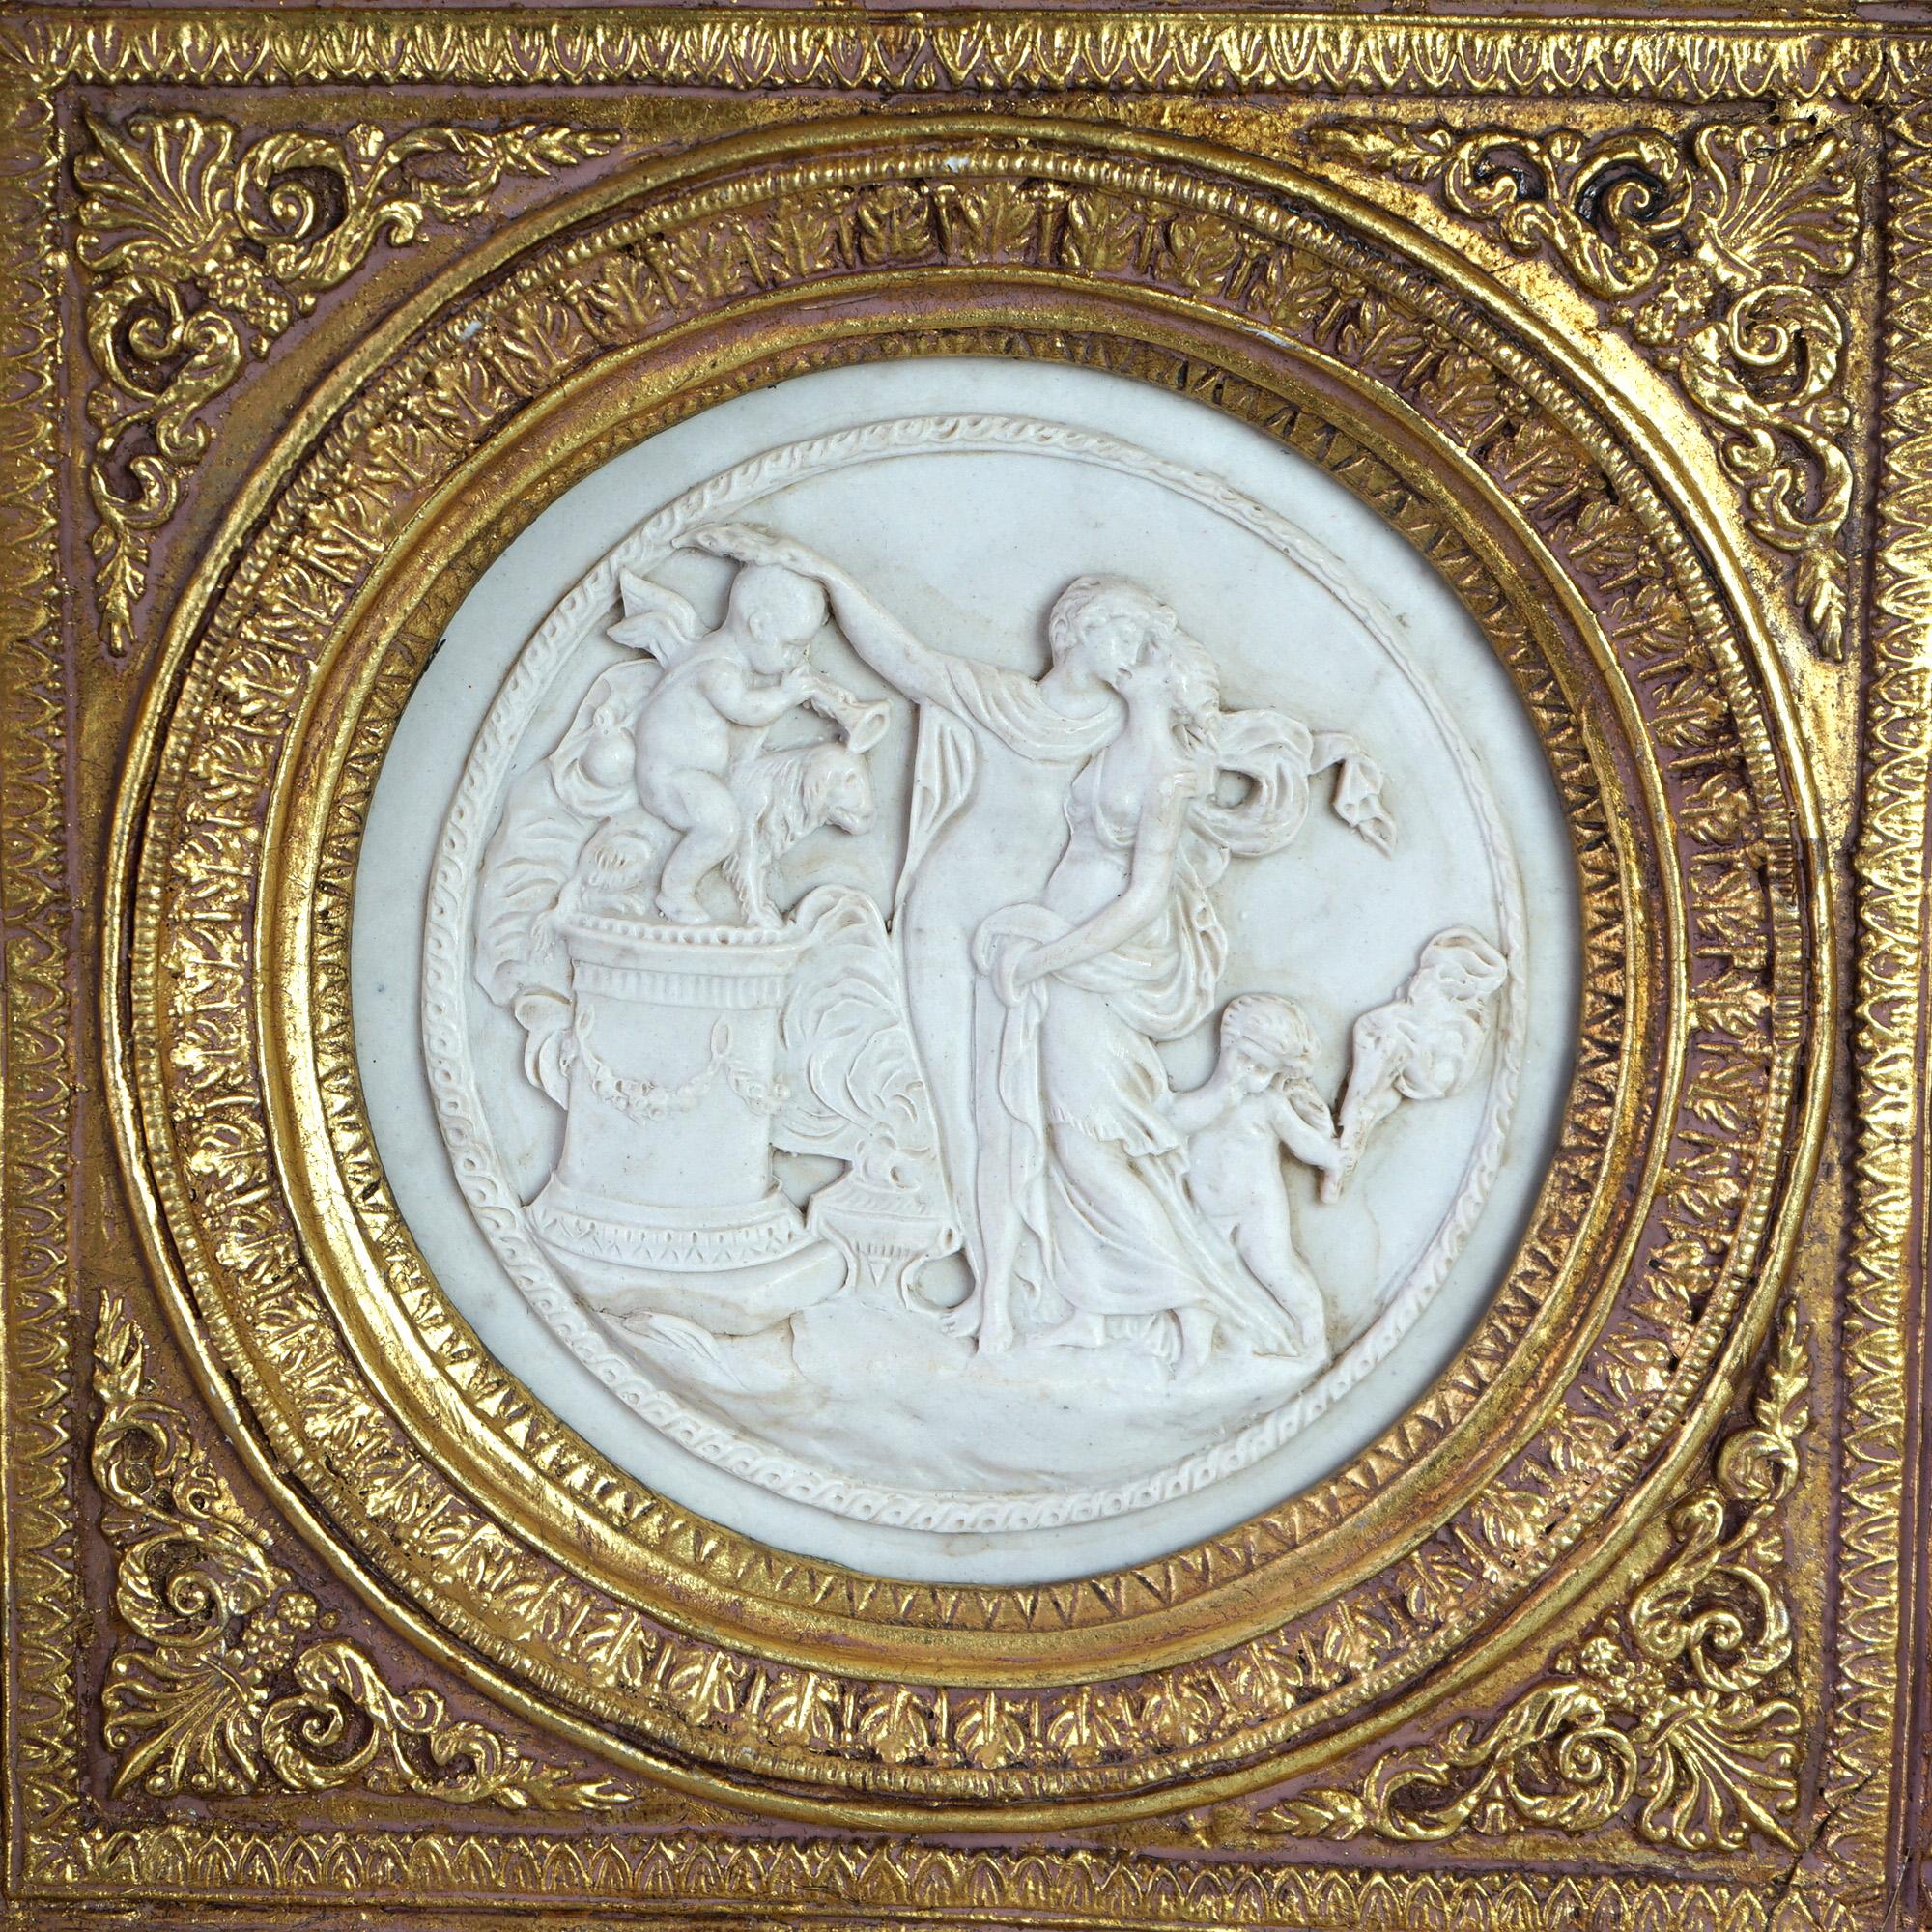 Antique Pair of Classical Carved Marble Plaques with Courting Figures & Cherubi In High Relief, en verso Seal as Photographed, 19th C (more recent giltwood frames)

Measure - overall 11